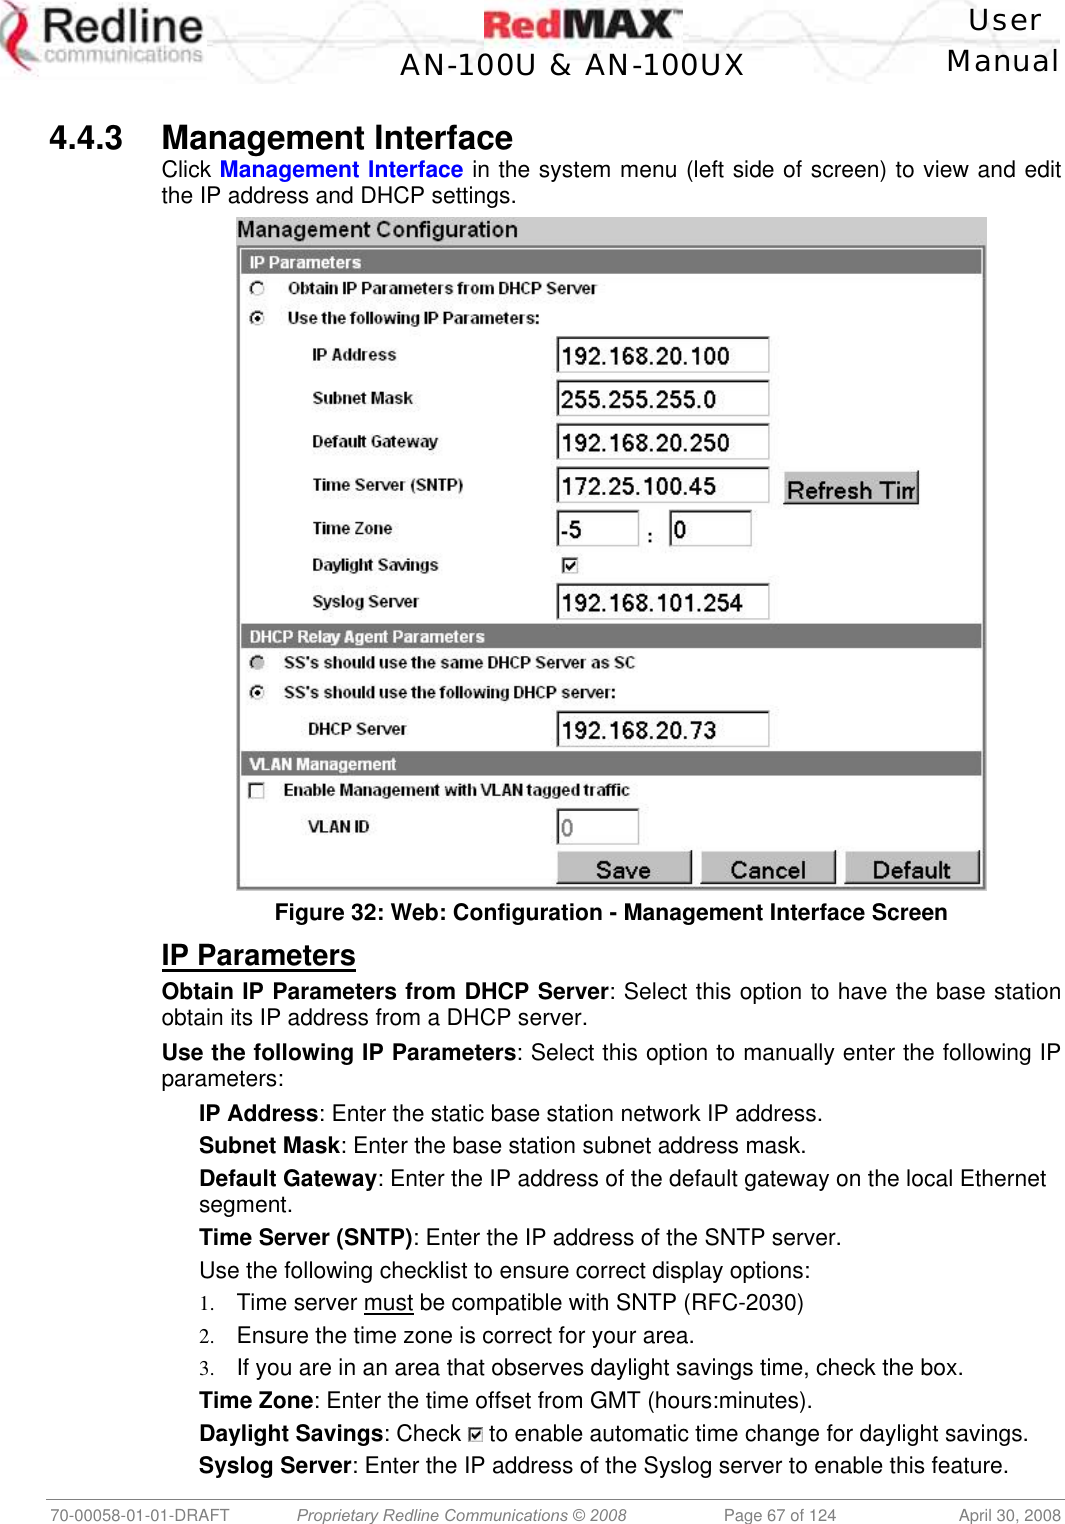    User  AN-100U &amp; AN-100UX Manual   70-00058-01-01-DRAFT  Proprietary Redline Communications © 2008   Page 67 of 124  April 30, 2008  4.4.3 Management Interface Click Management Interface in the system menu (left side of screen) to view and edit the IP address and DHCP settings.  Figure 32: Web: Configuration - Management Interface Screen IP Parameters Obtain IP Parameters from DHCP Server: Select this option to have the base station obtain its IP address from a DHCP server. Use the following IP Parameters: Select this option to manually enter the following IP parameters: IP Address: Enter the static base station network IP address. Subnet Mask: Enter the base station subnet address mask. Default Gateway: Enter the IP address of the default gateway on the local Ethernet segment. Time Server (SNTP): Enter the IP address of the SNTP server. Use the following checklist to ensure correct display options: 1.  Time server must be compatible with SNTP (RFC-2030) 2.  Ensure the time zone is correct for your area. 3.  If you are in an area that observes daylight savings time, check the box. Time Zone: Enter the time offset from GMT (hours:minutes). Daylight Savings: Check   to enable automatic time change for daylight savings. Syslog Server: Enter the IP address of the Syslog server to enable this feature. 